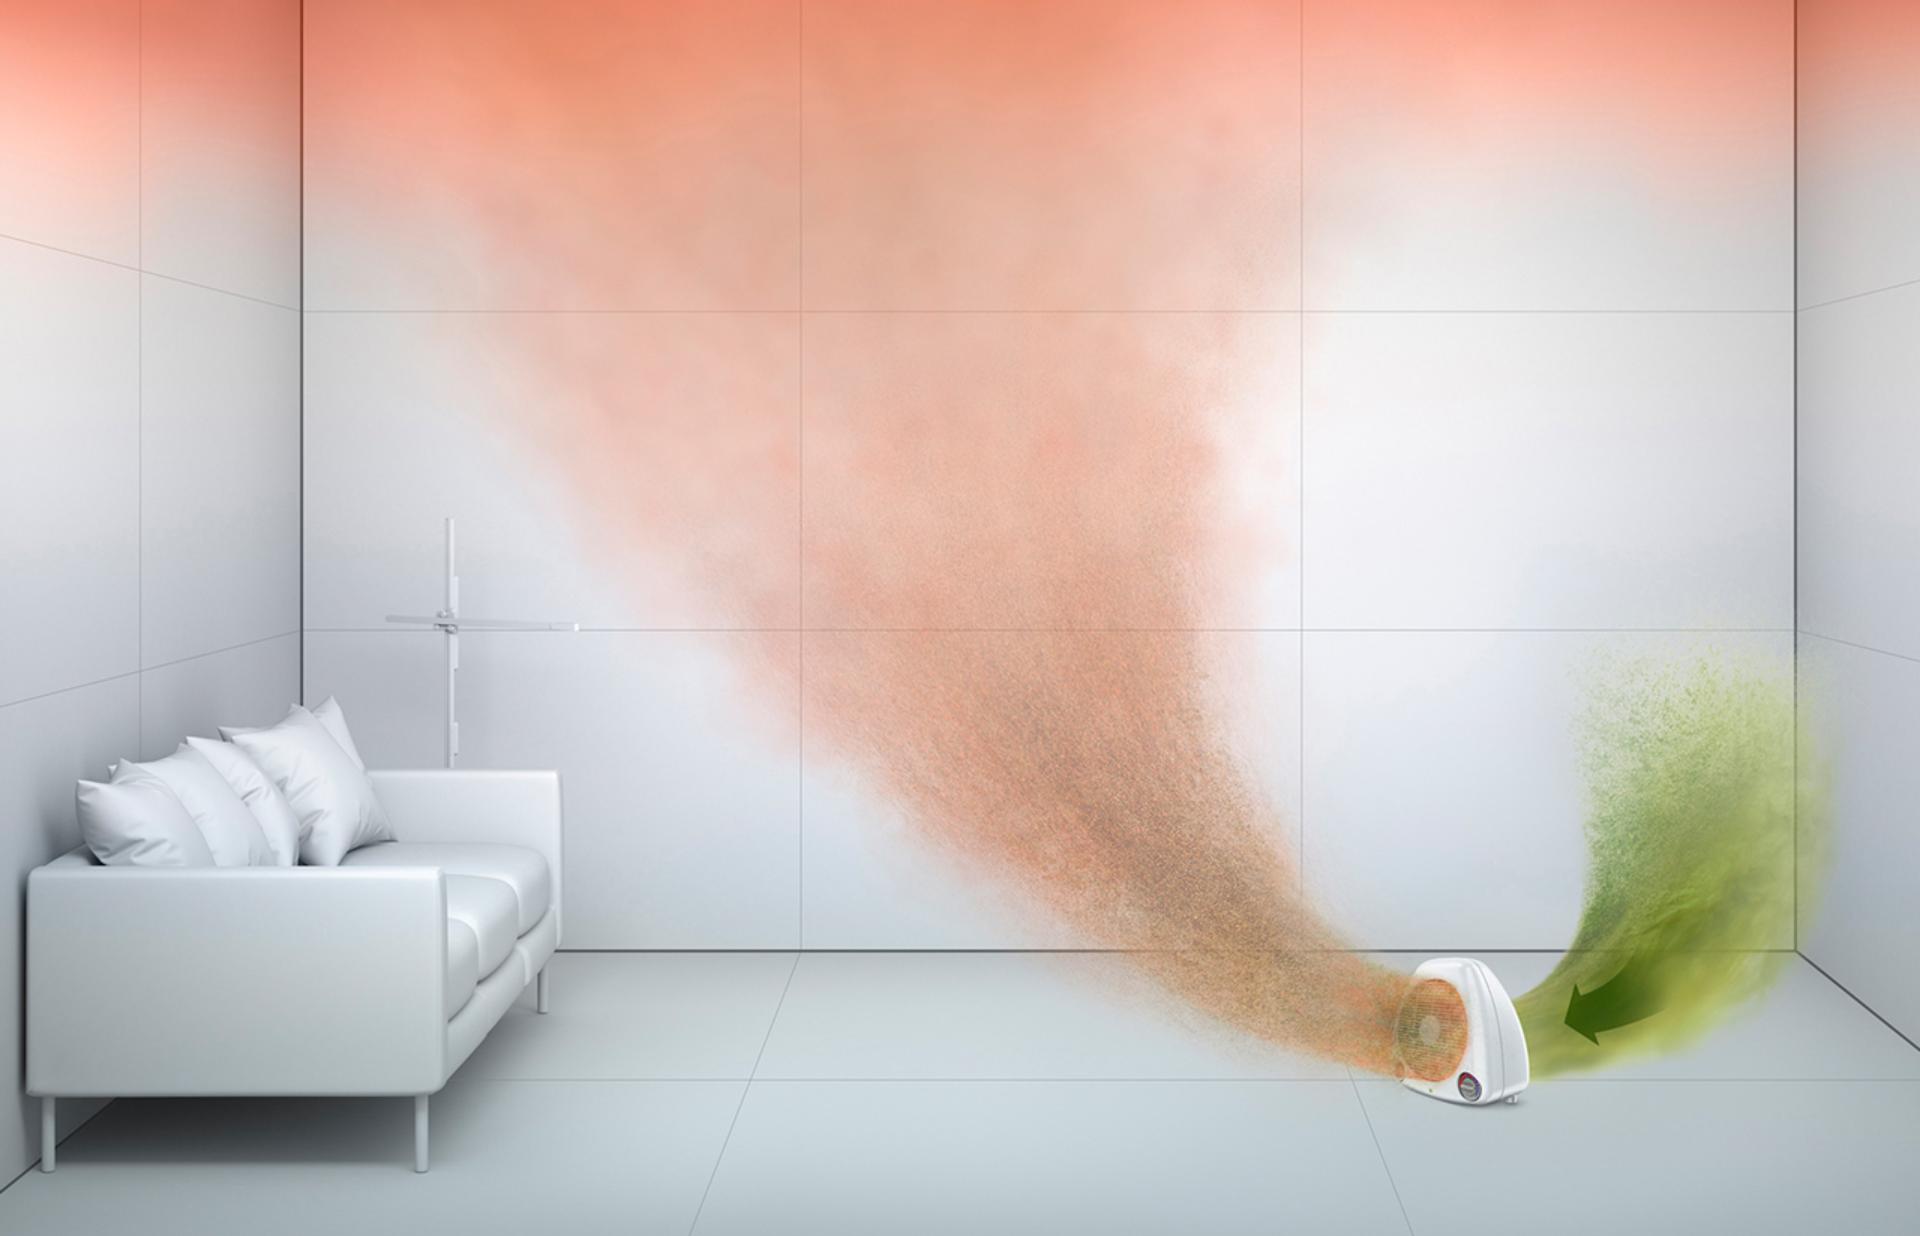 Non-Dyson purifier leaving areas polluted and unheated